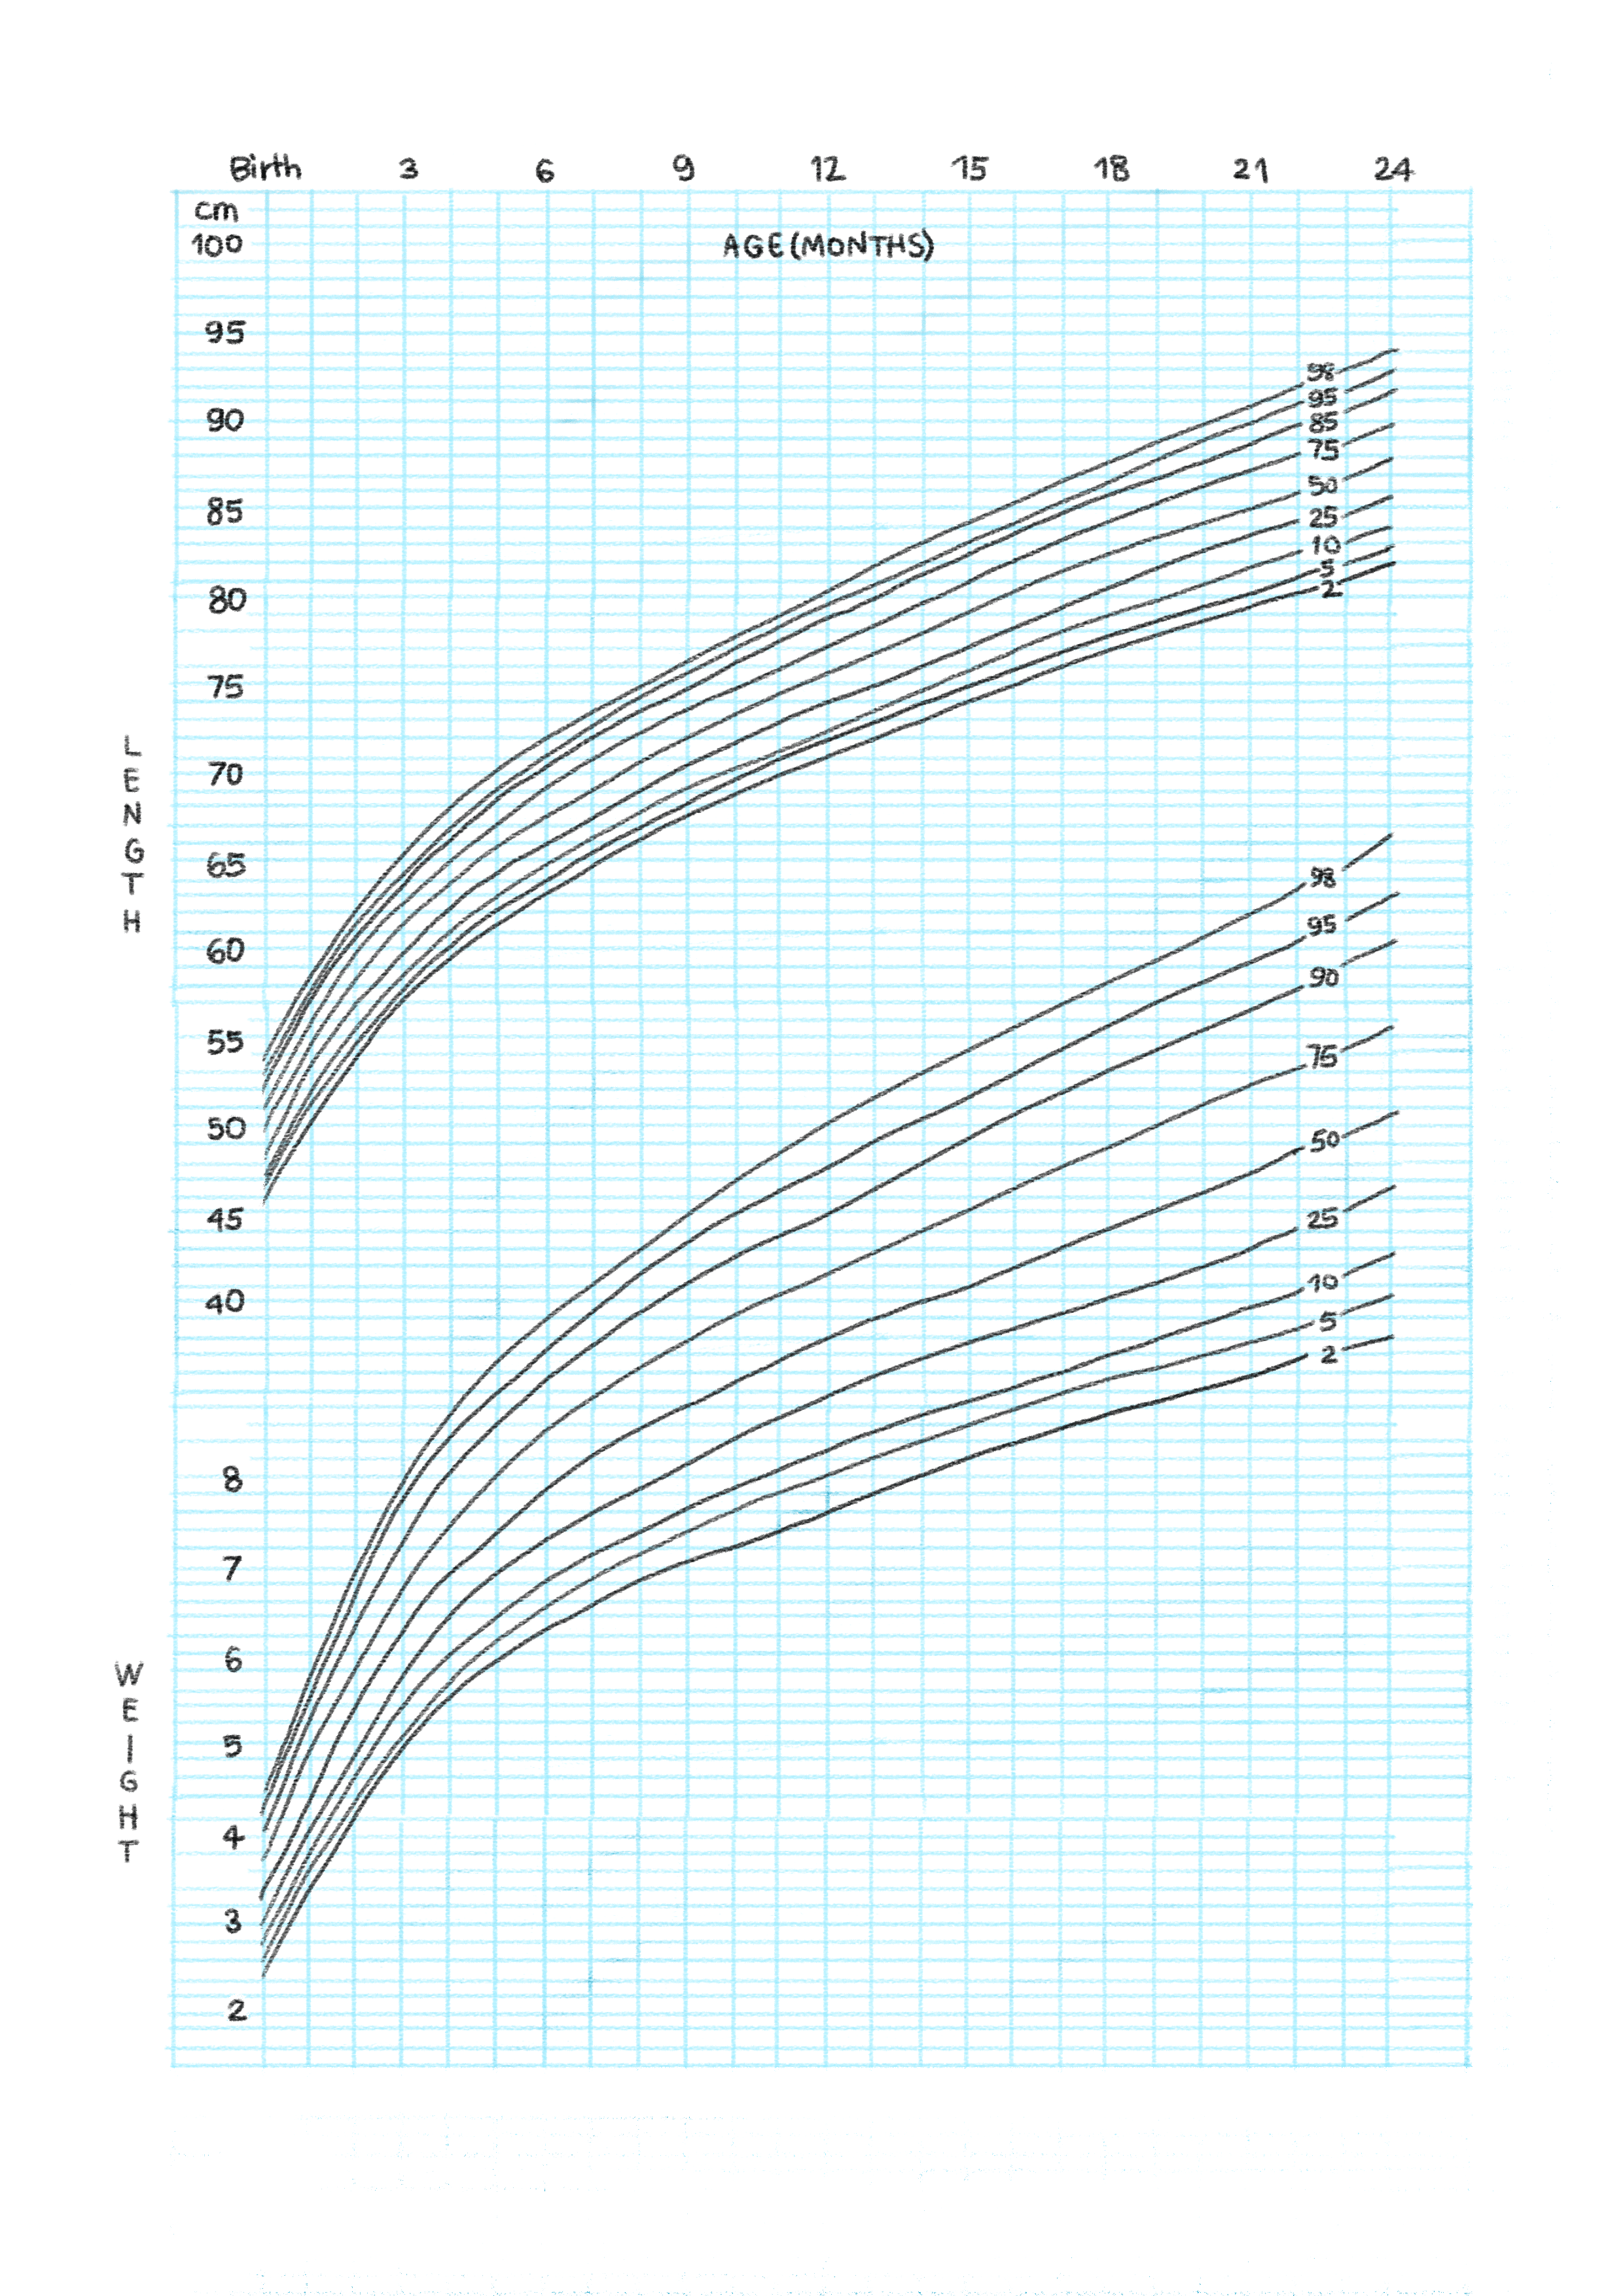 Different trajectories of weight chart.